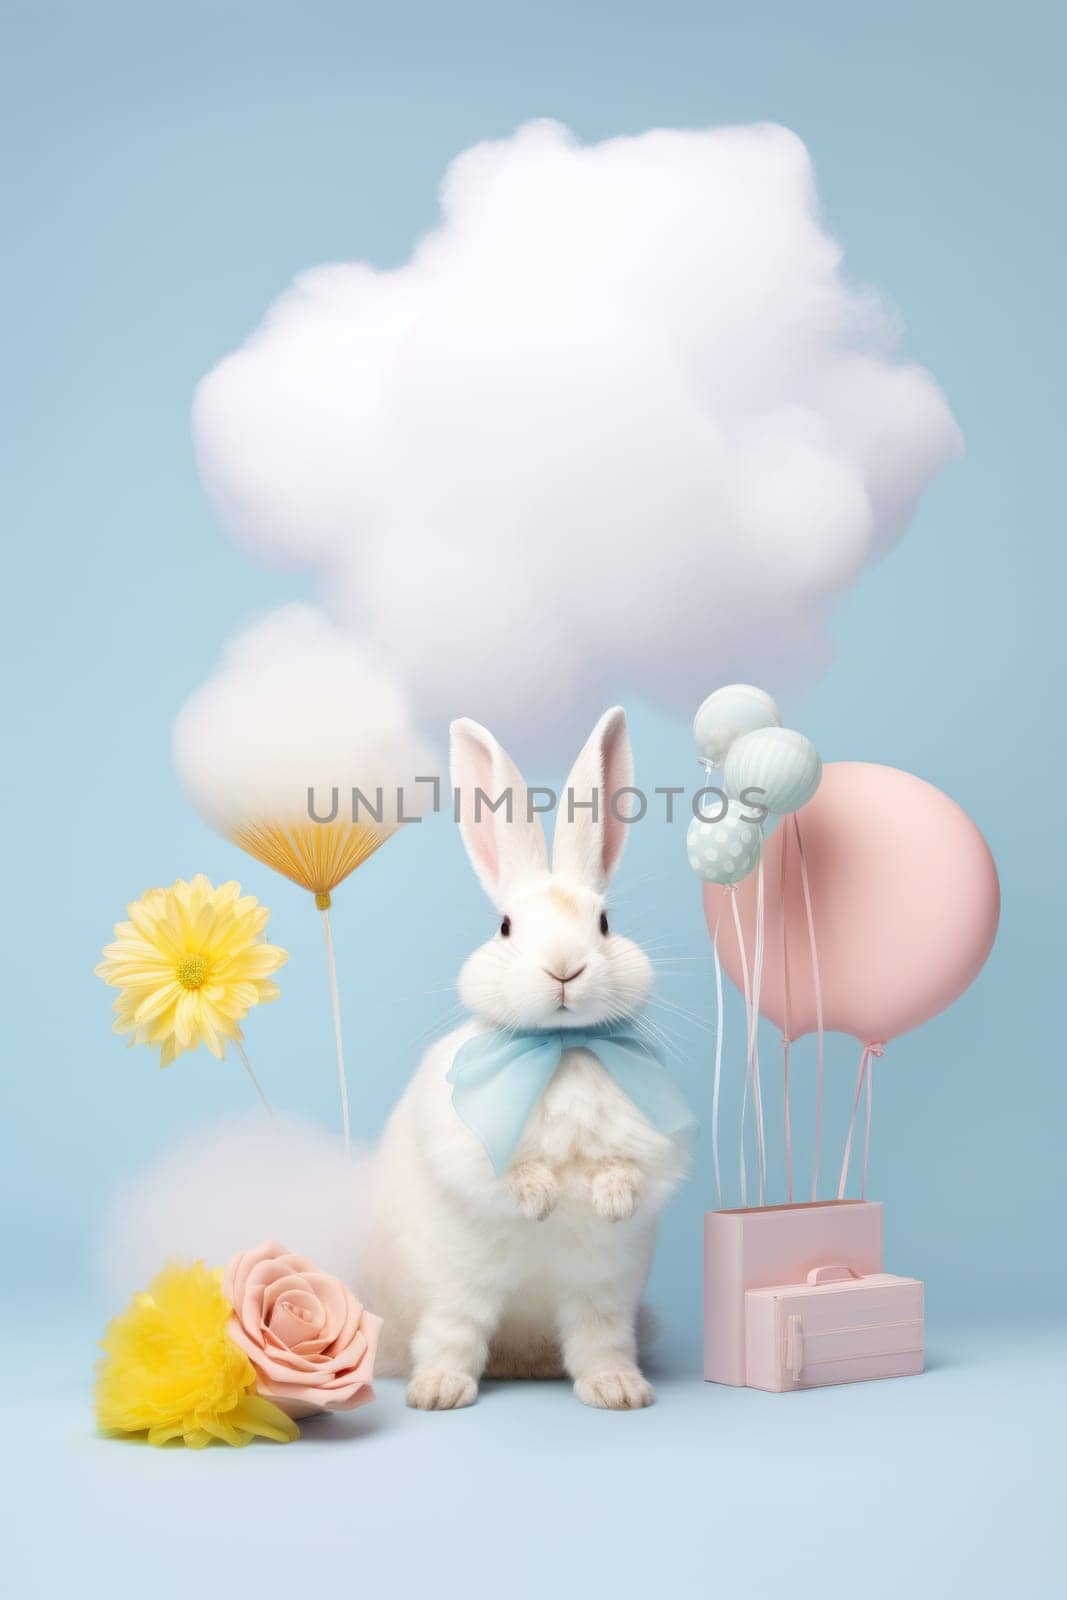 A white rabbit with a blue bow and some balloons